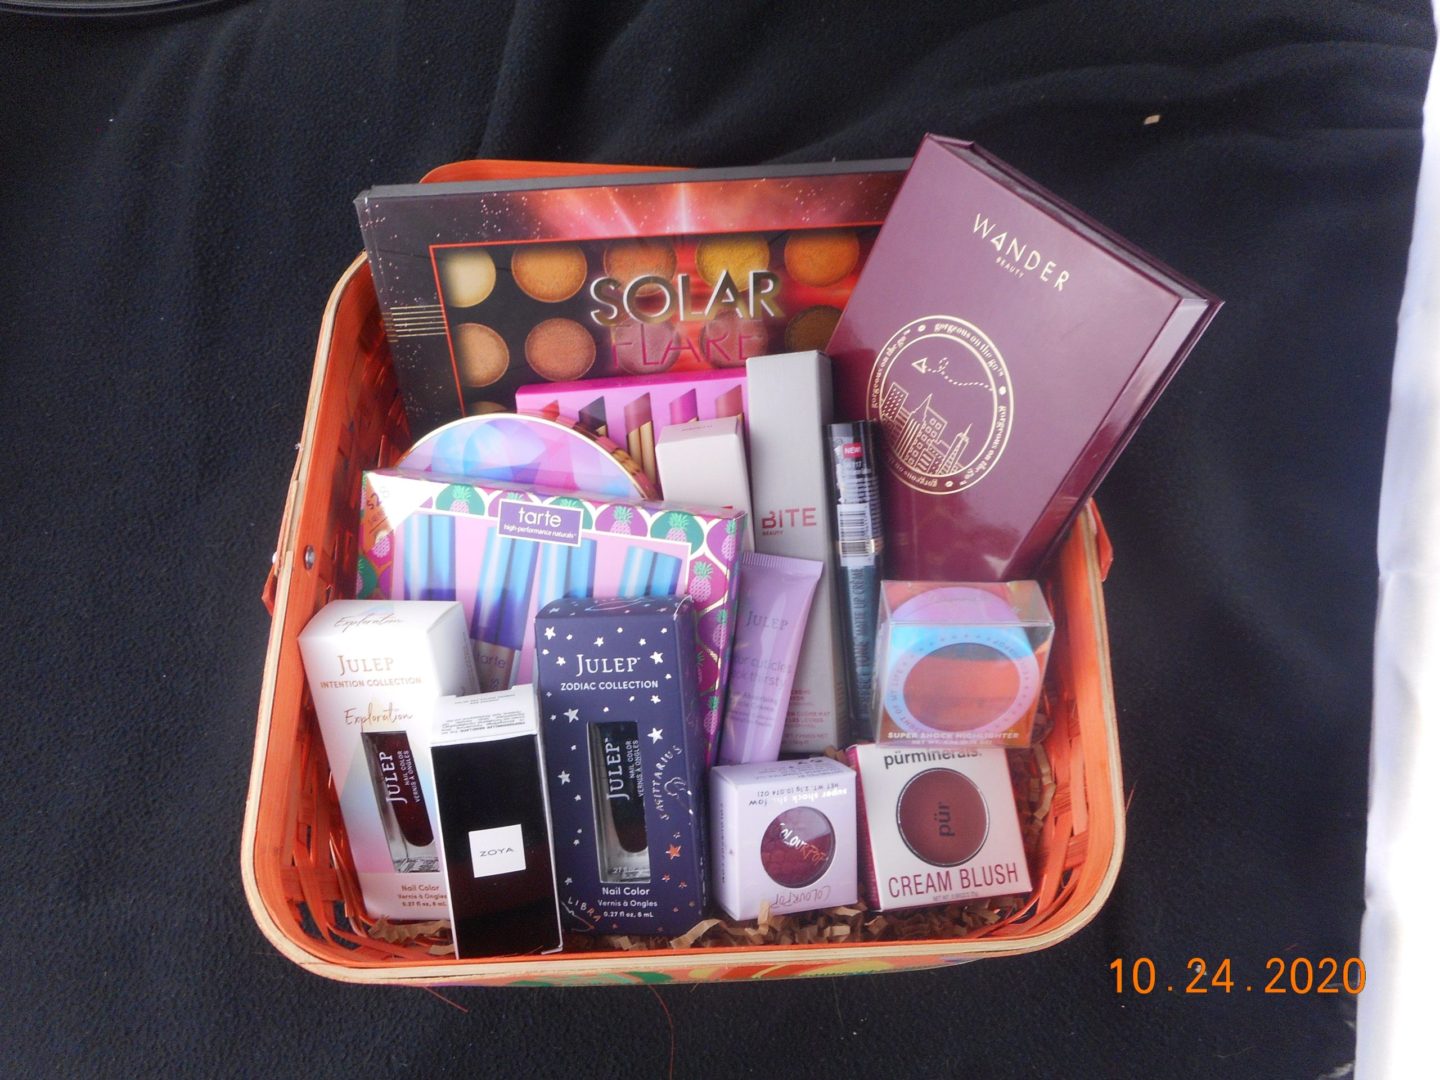 a basket filled with beauty products. Makeup, nail polish and eye shadows. Along with lip products.